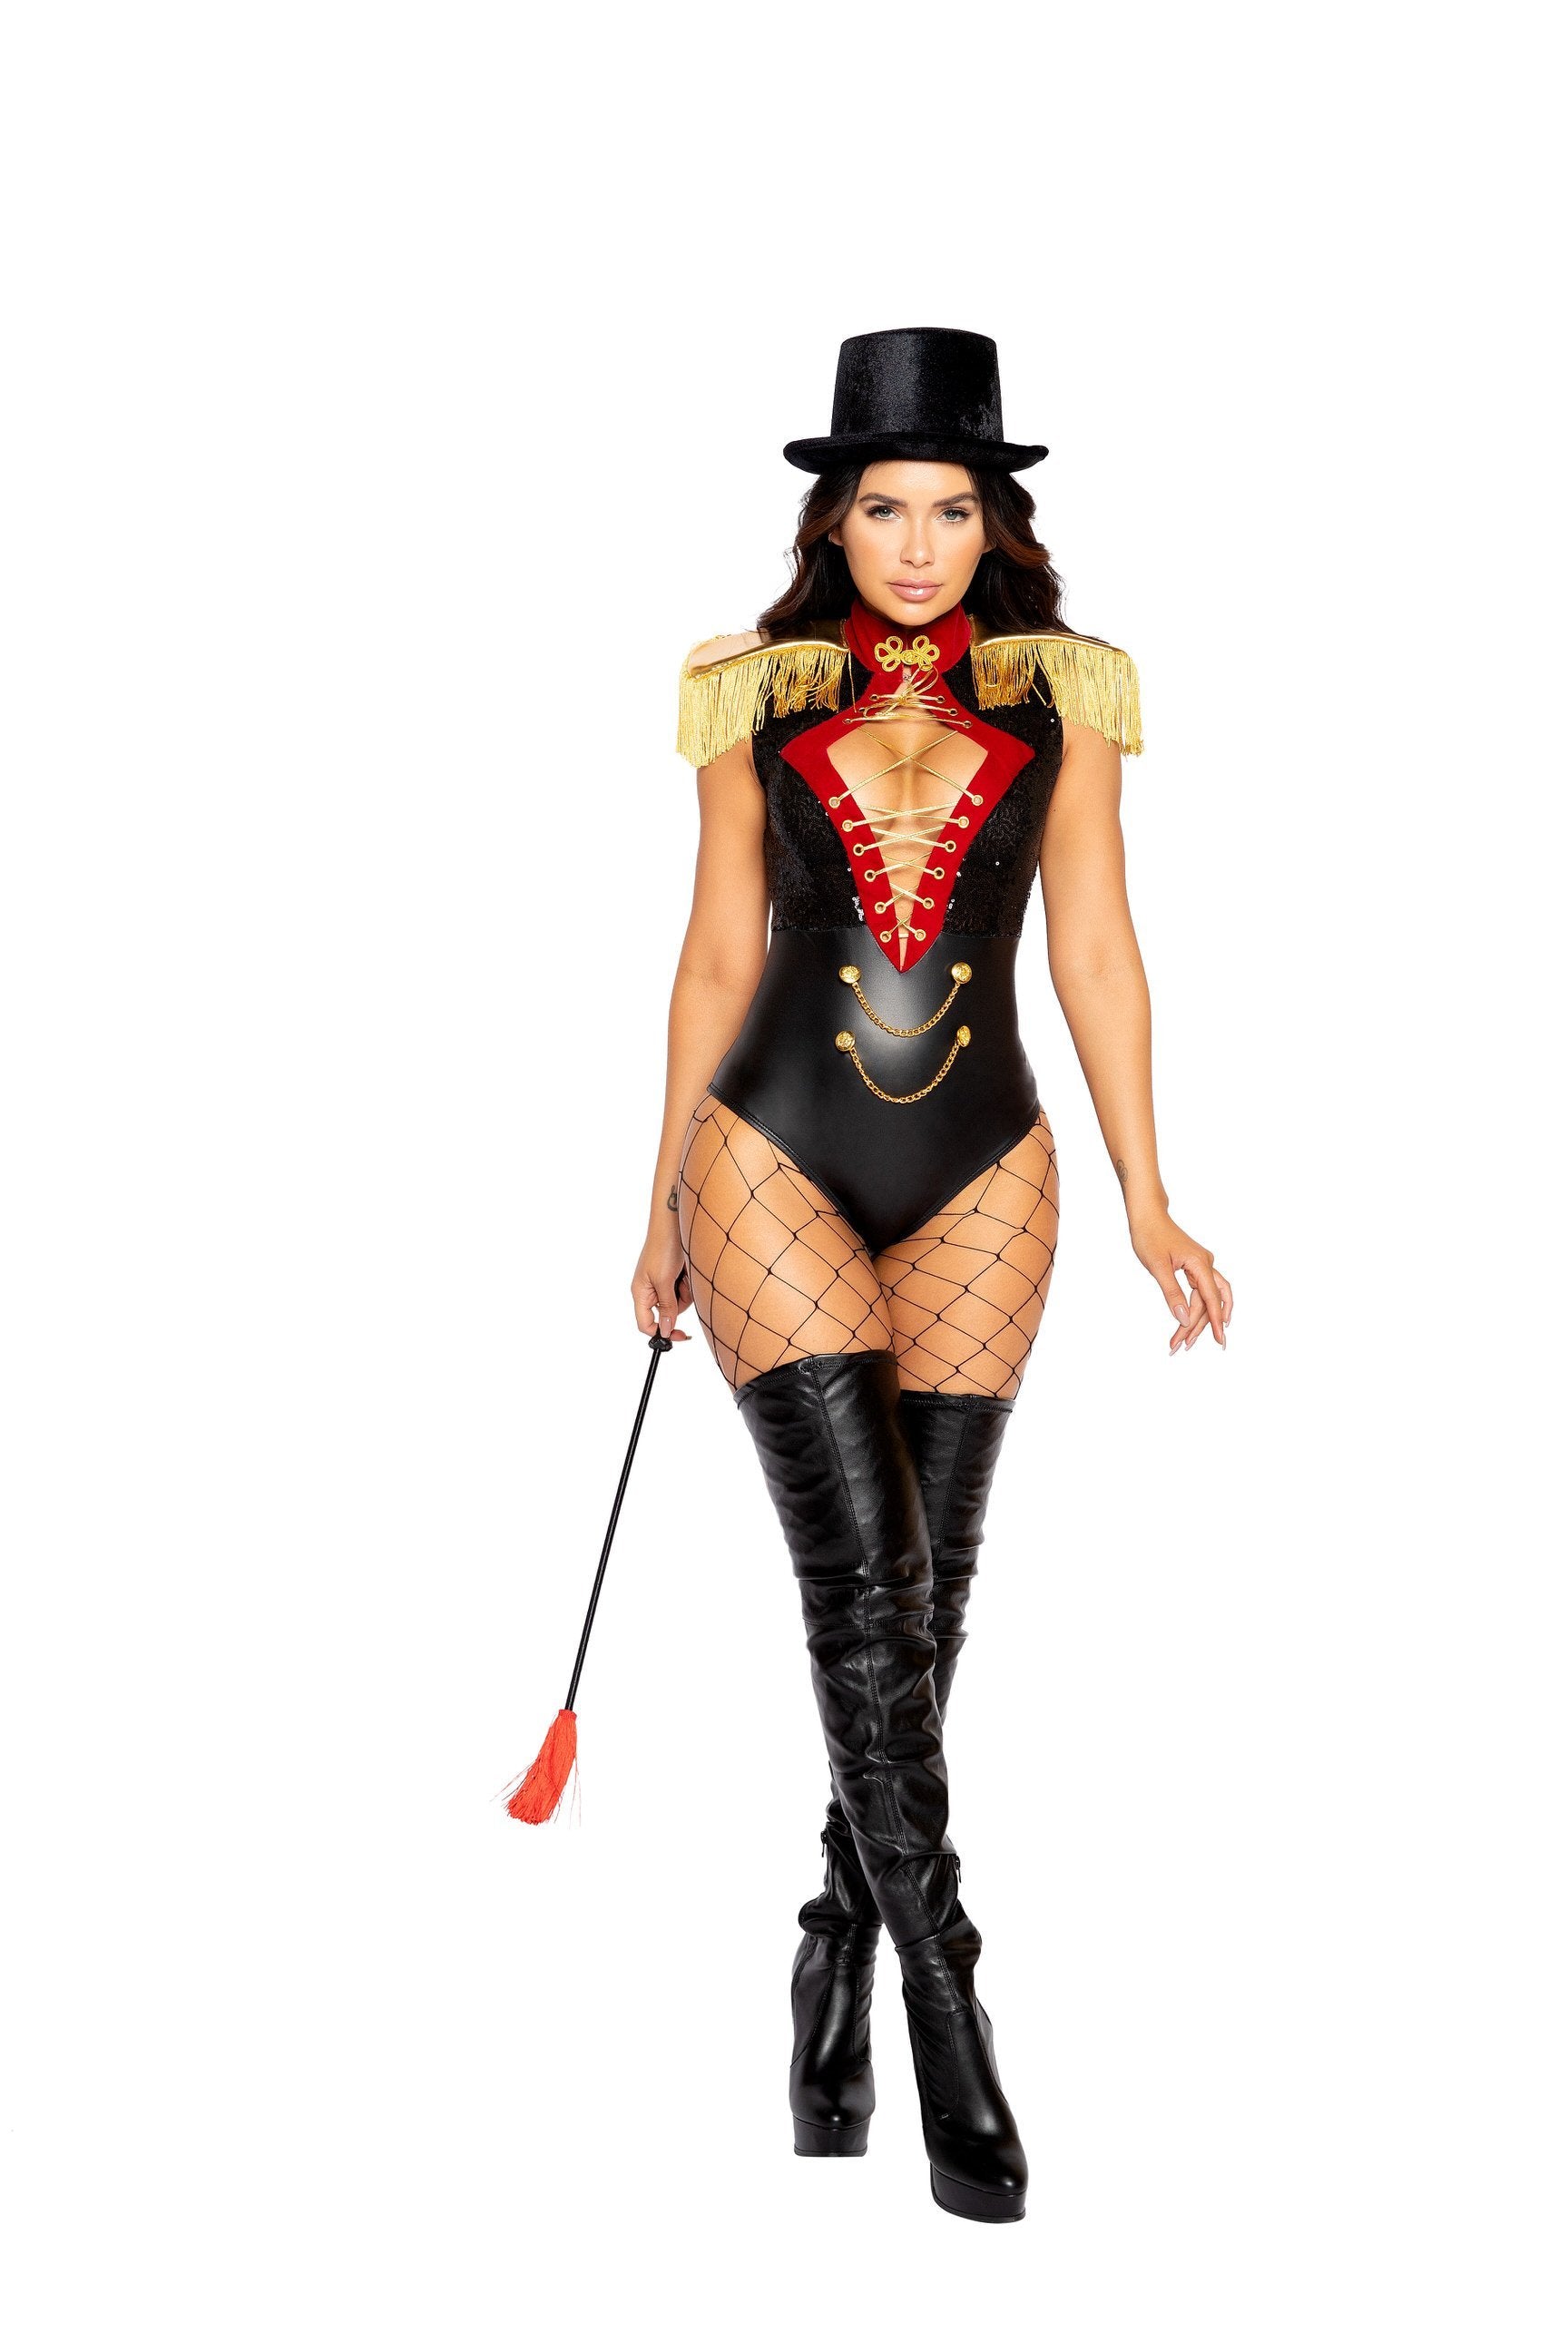 Roma Costume Costumes Small / Black/Red/Gold 4976 - 2pc Beauty Ringmaster